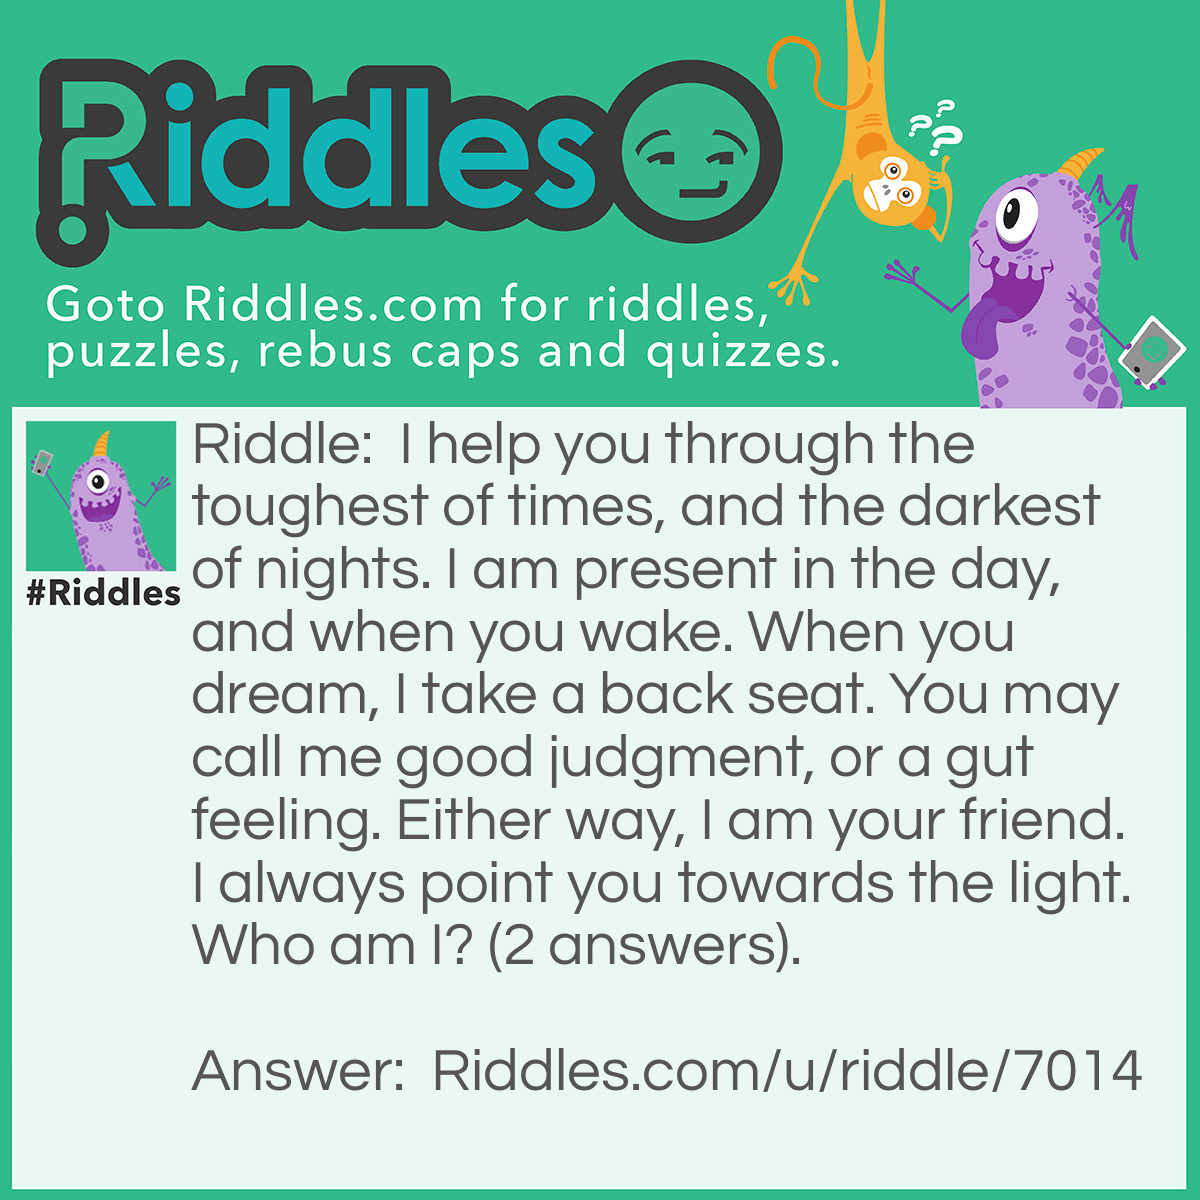 Riddle: I help you through the toughest of times, and the darkest of nights. I am present in the day, and when you wake. When you dream, I take a back seat. You may call me good judgment, or a gut feeling. Either way, I am your friend. I always point you towards the light. Who am I? (2 answers). Answer: Your conscious, or common sense.